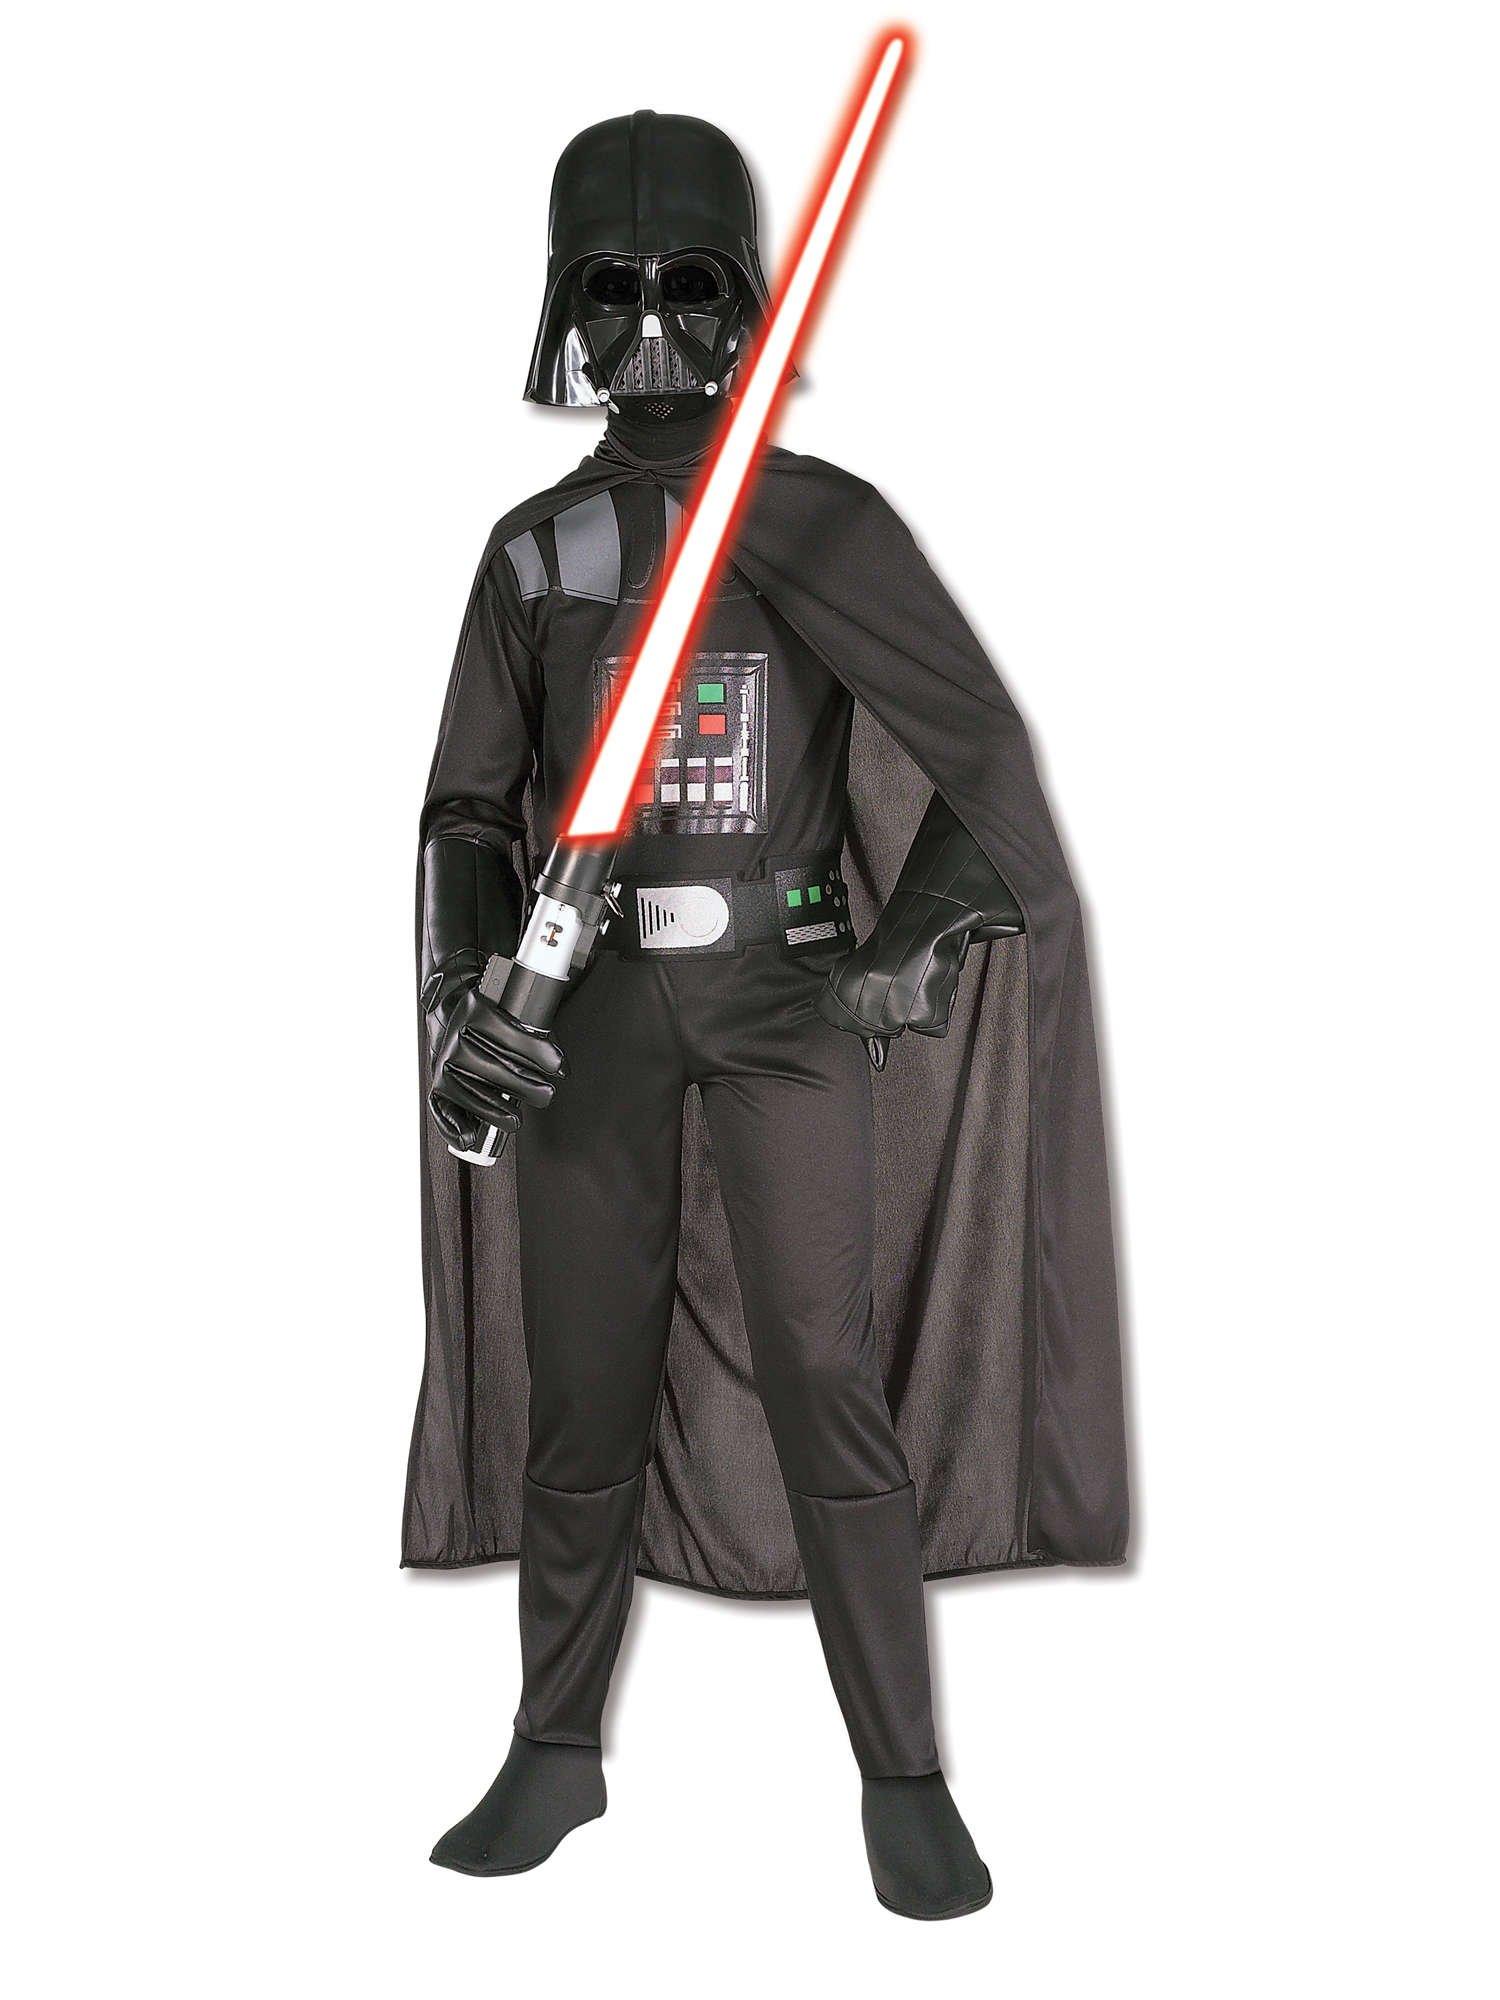 Kids Darth Vader Costume From Star Wars A New Hope